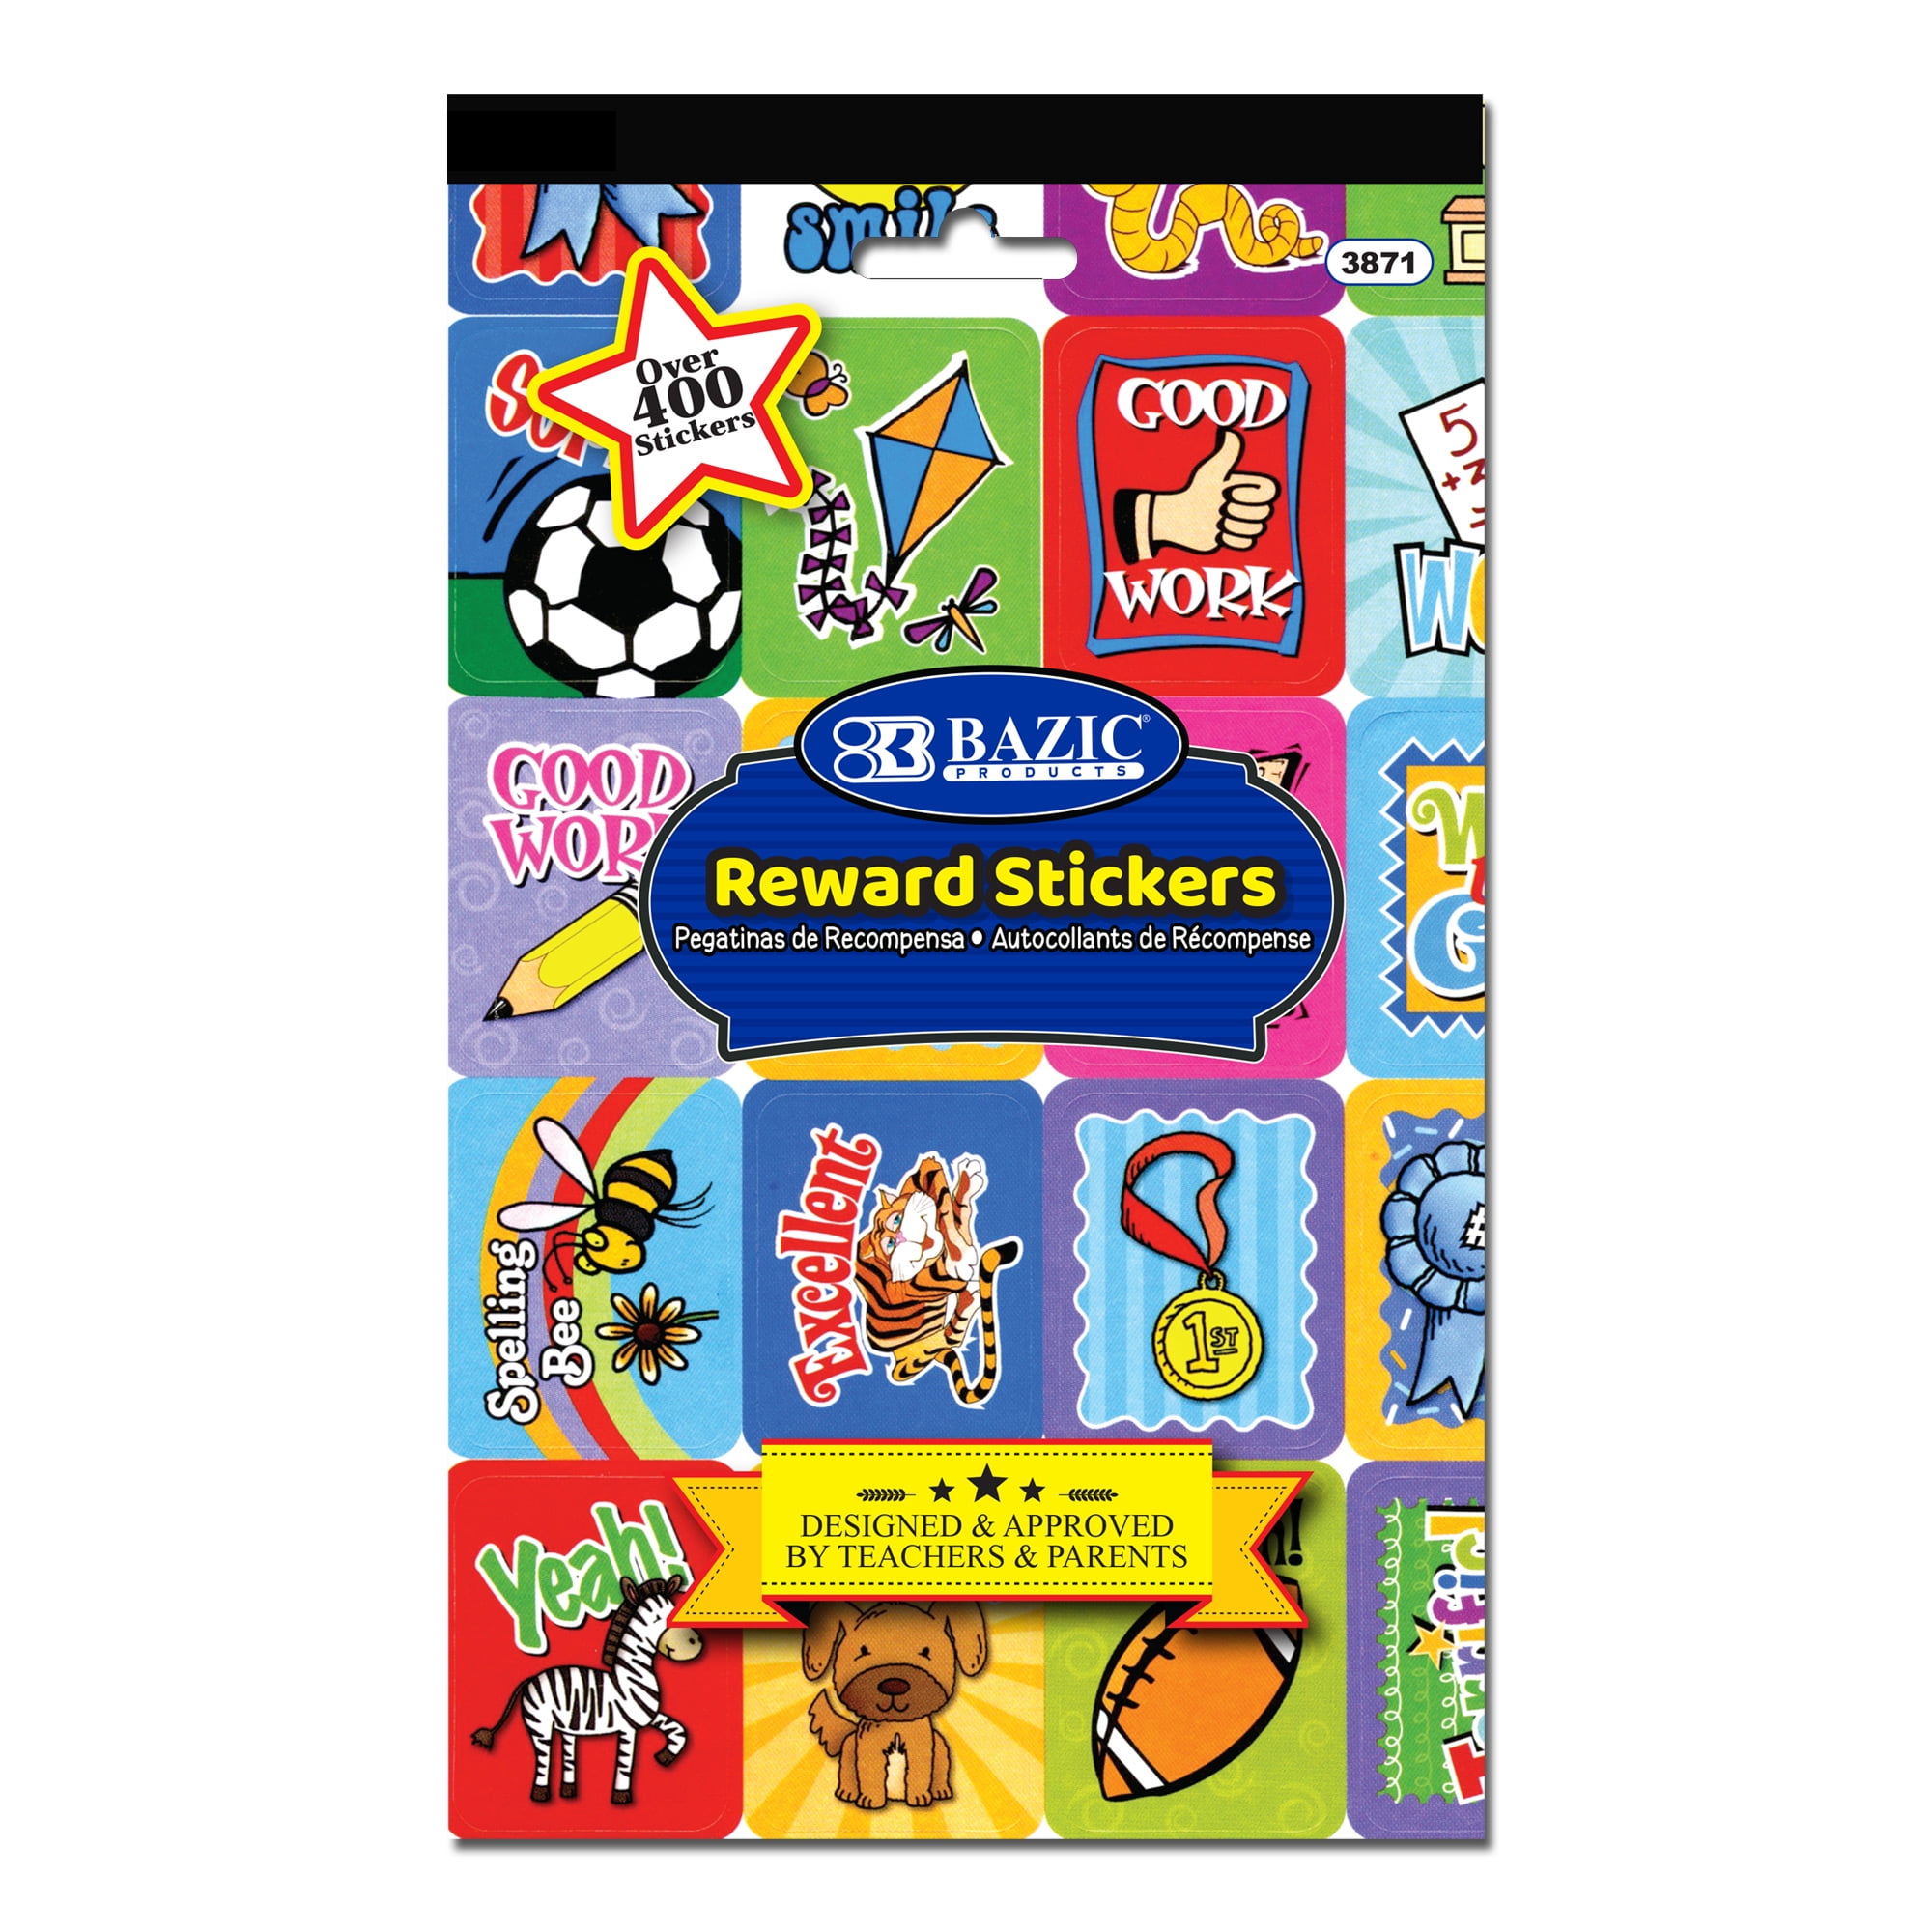  1500 Pack of Face Stickers for Kids, Silly Eyes, Nose